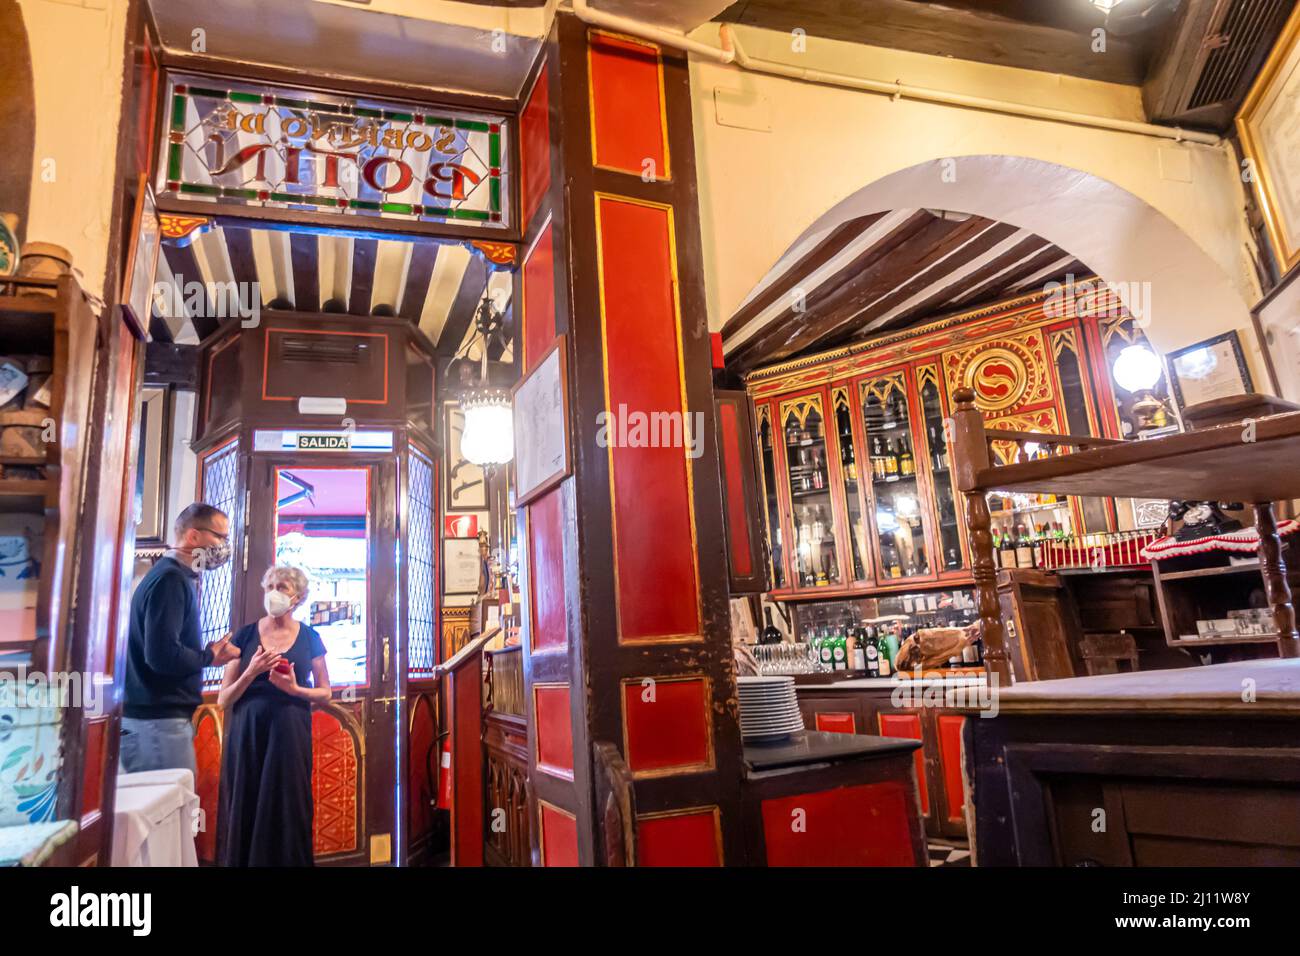 Spanish resturant Sabrino de Botin interior, founded in 1725, it's the oldest restaurant in the world in continuous operation.Madrid, Spain Stock Photo